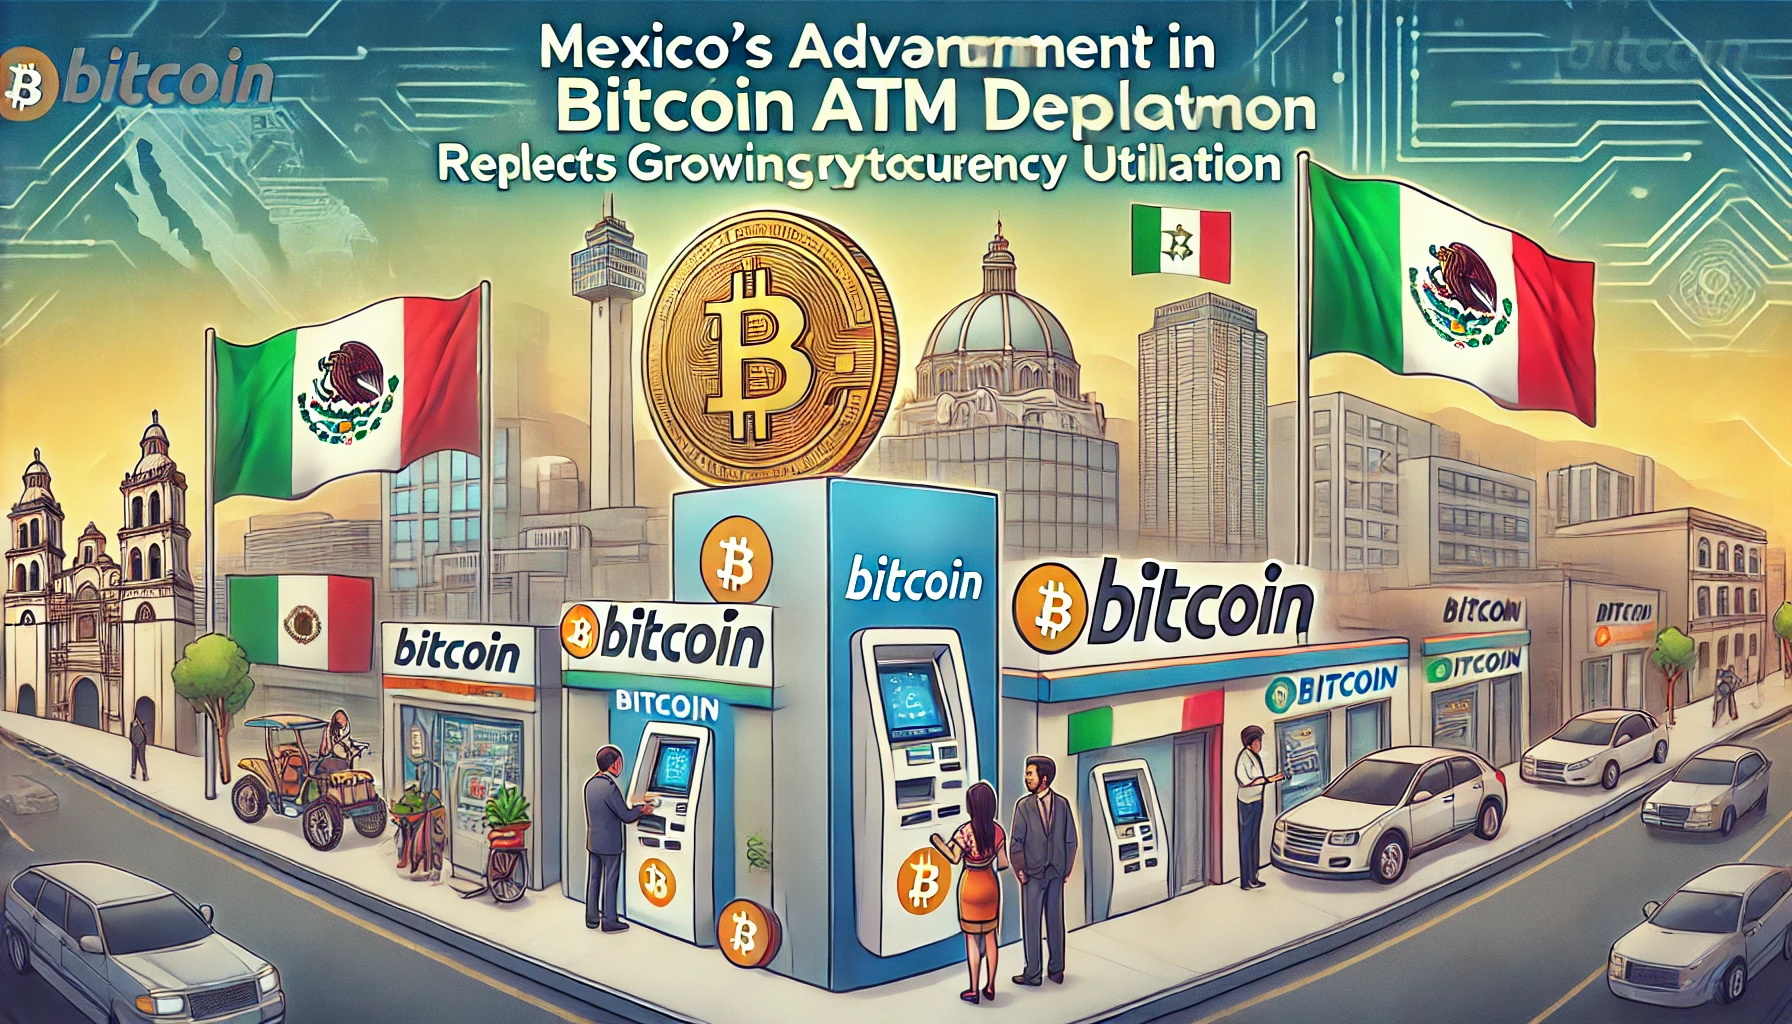 Mexico’s Advancement in Bitcoin ATM Deployment Reflects Growing Cryptocurrency Utilization